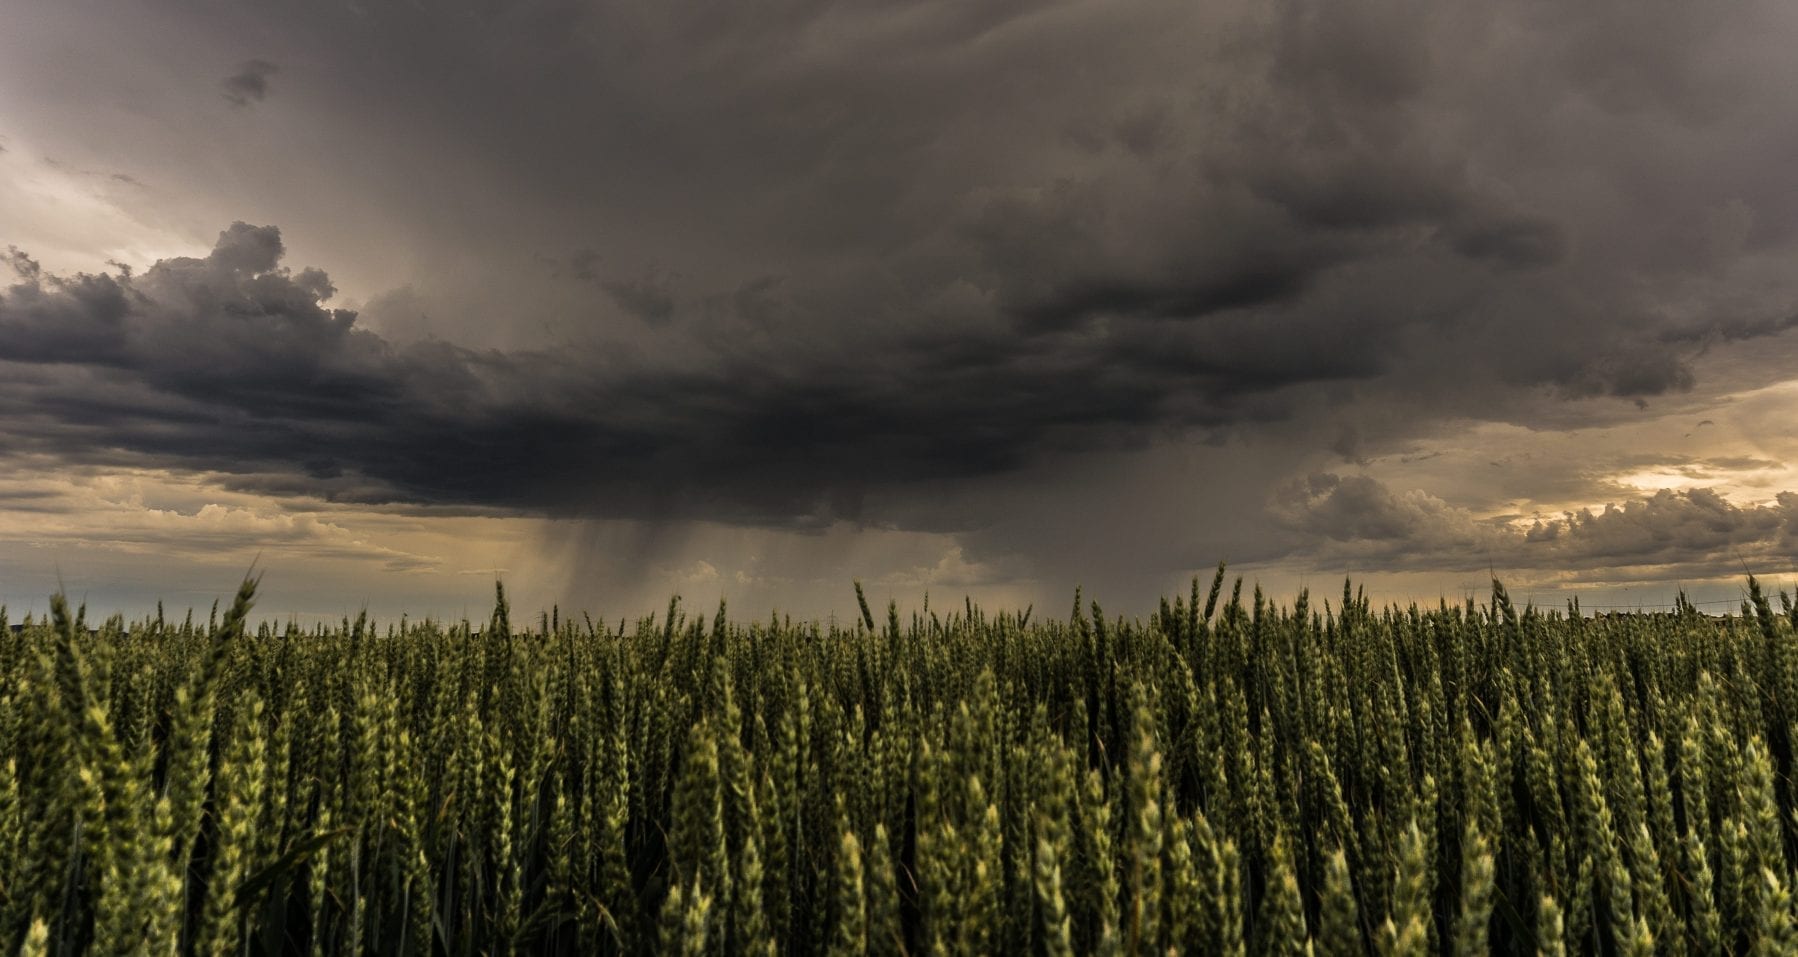 Storm and dark sky over agricultural fields